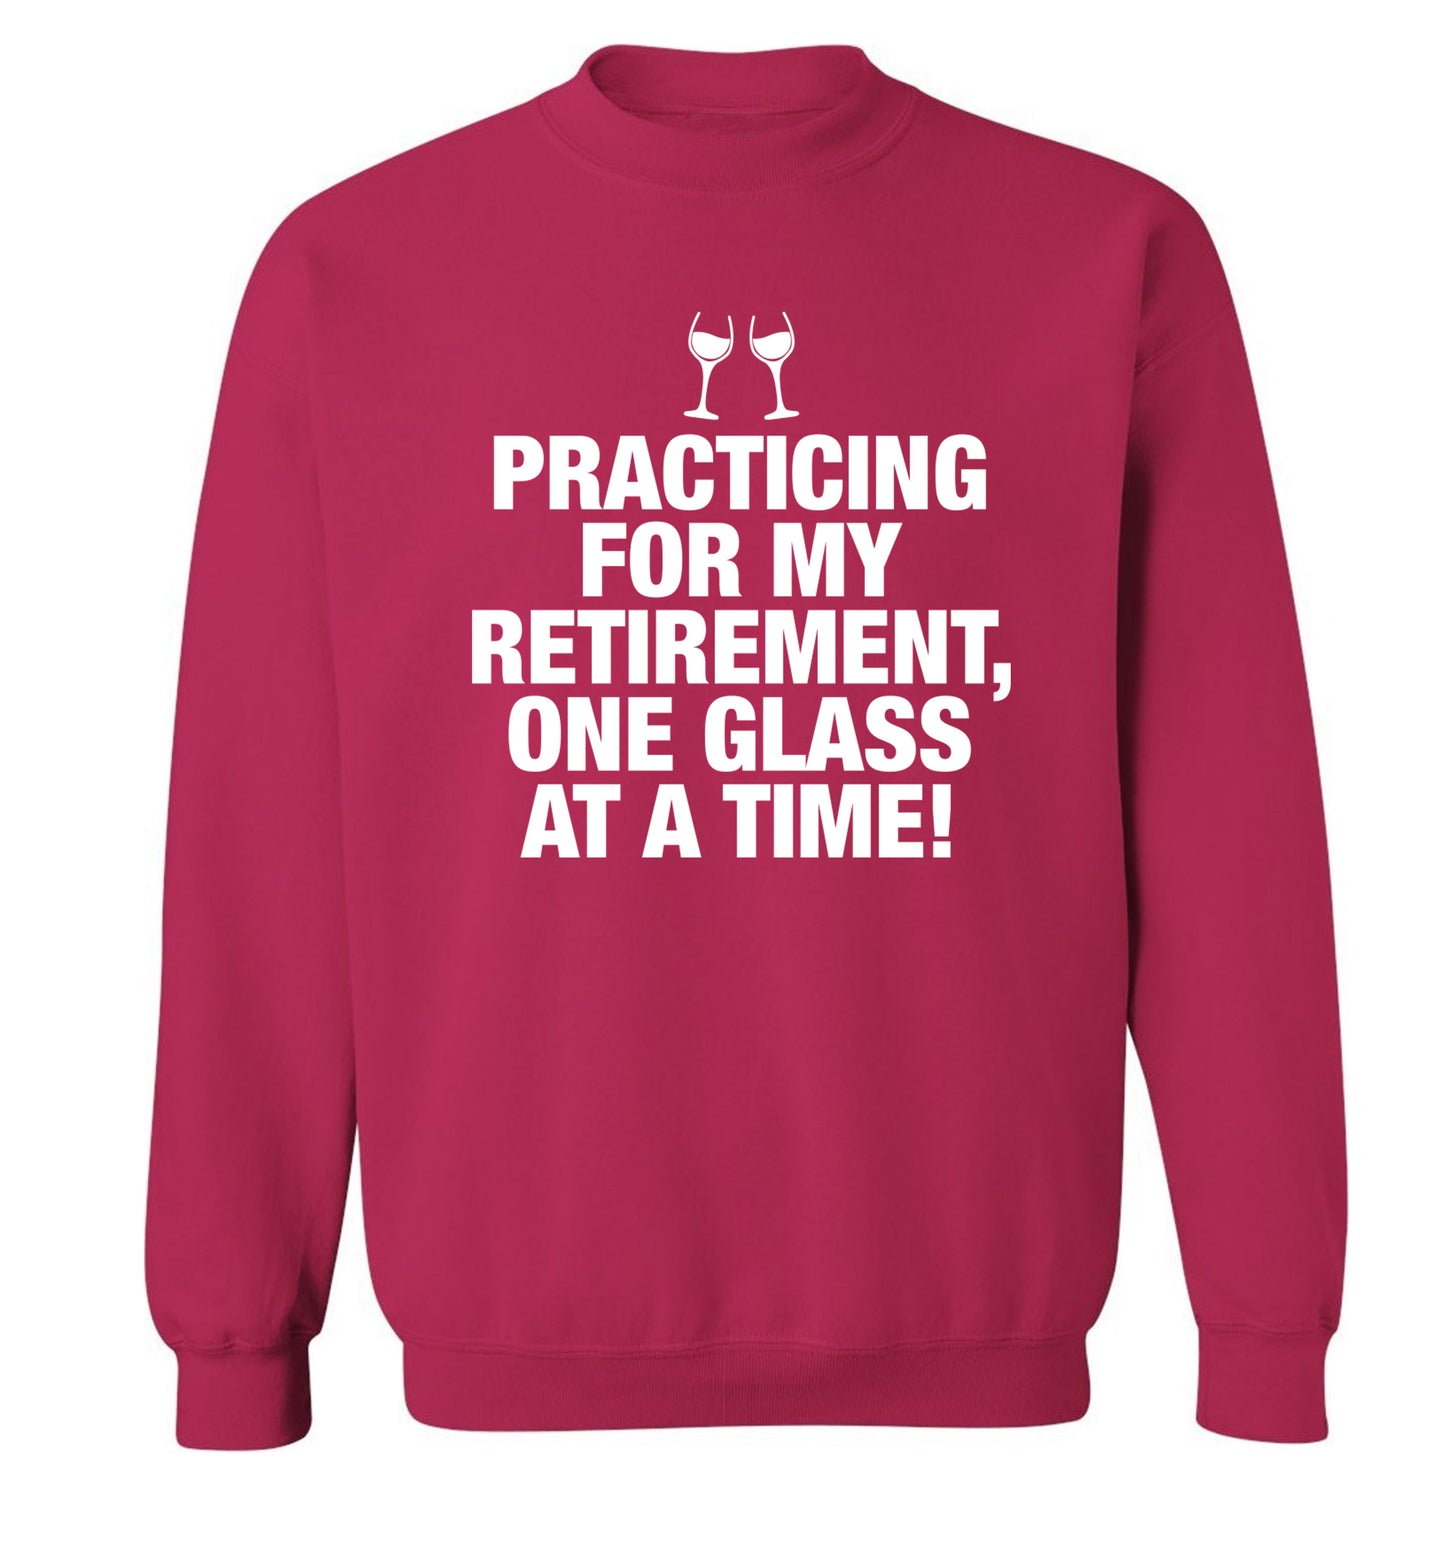 Practicing my retirement one glass at a time Adult's unisex pink Sweater 2XL